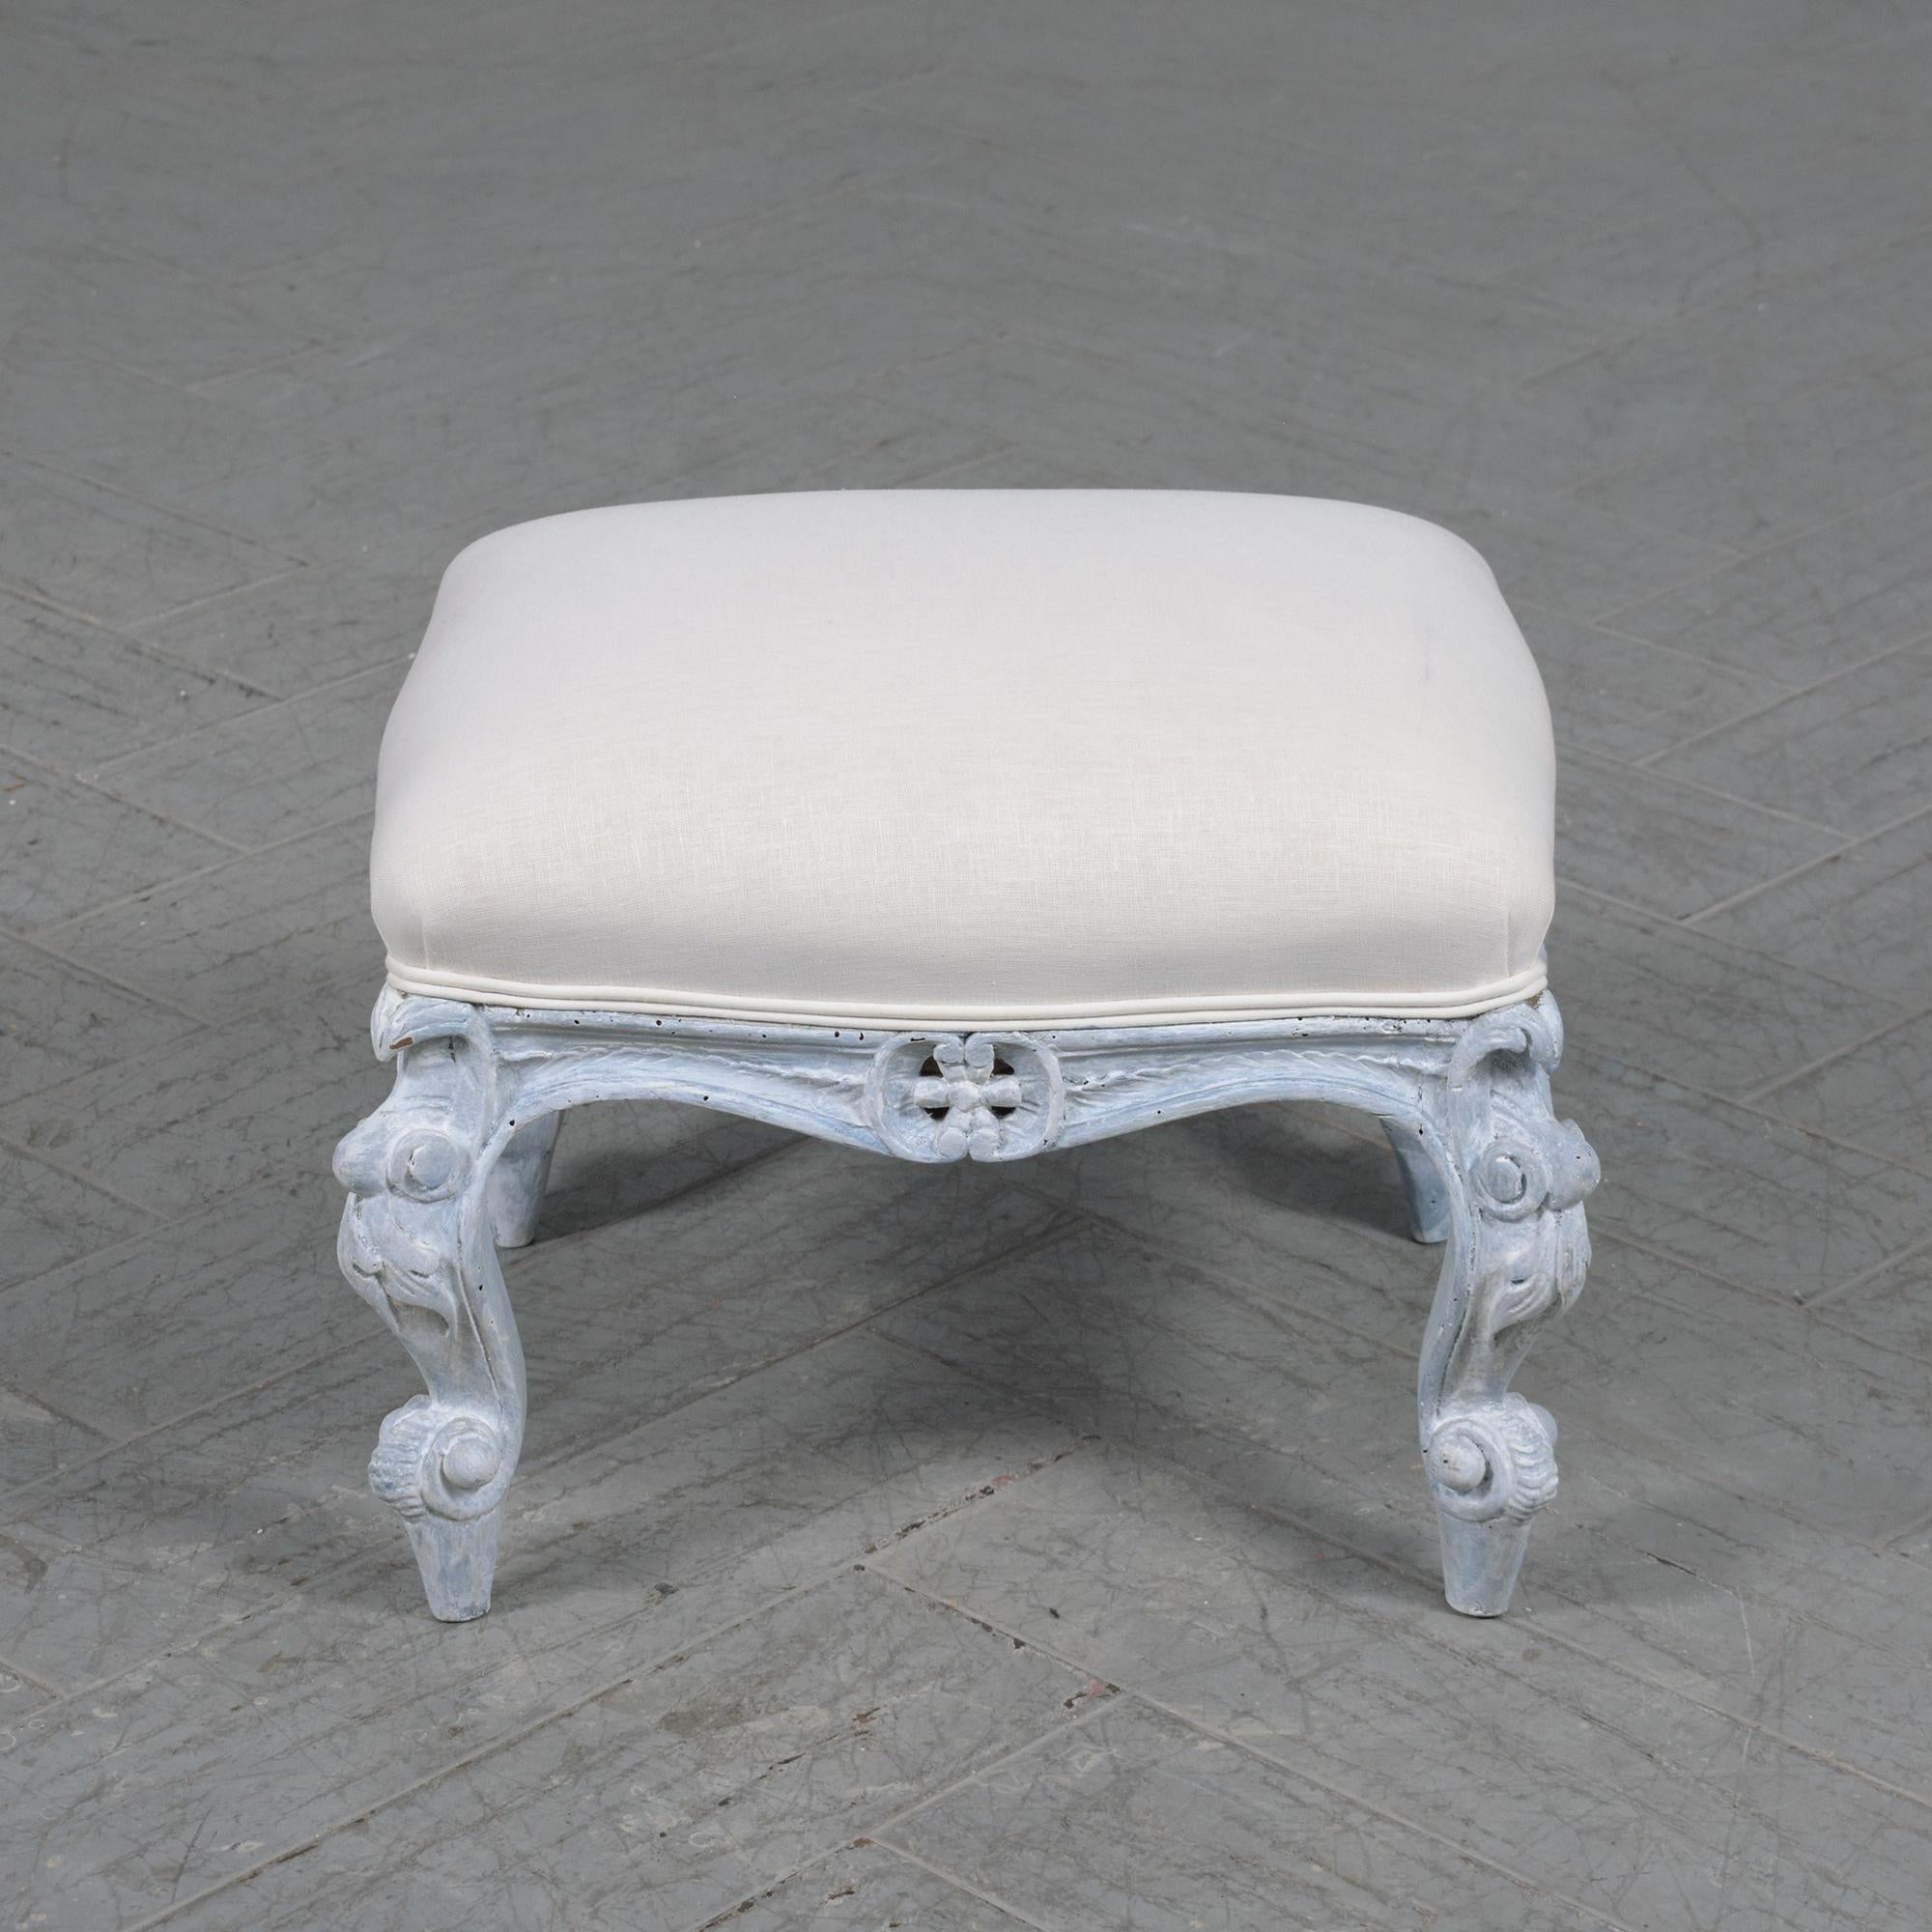 Immerse yourself in the sophistication of French design with our extraordinary antique footstool, a masterpiece crafted in the Louis XV style. Newly restored by our expert team of professional craftsmen, this footstool exemplifies a commitment to